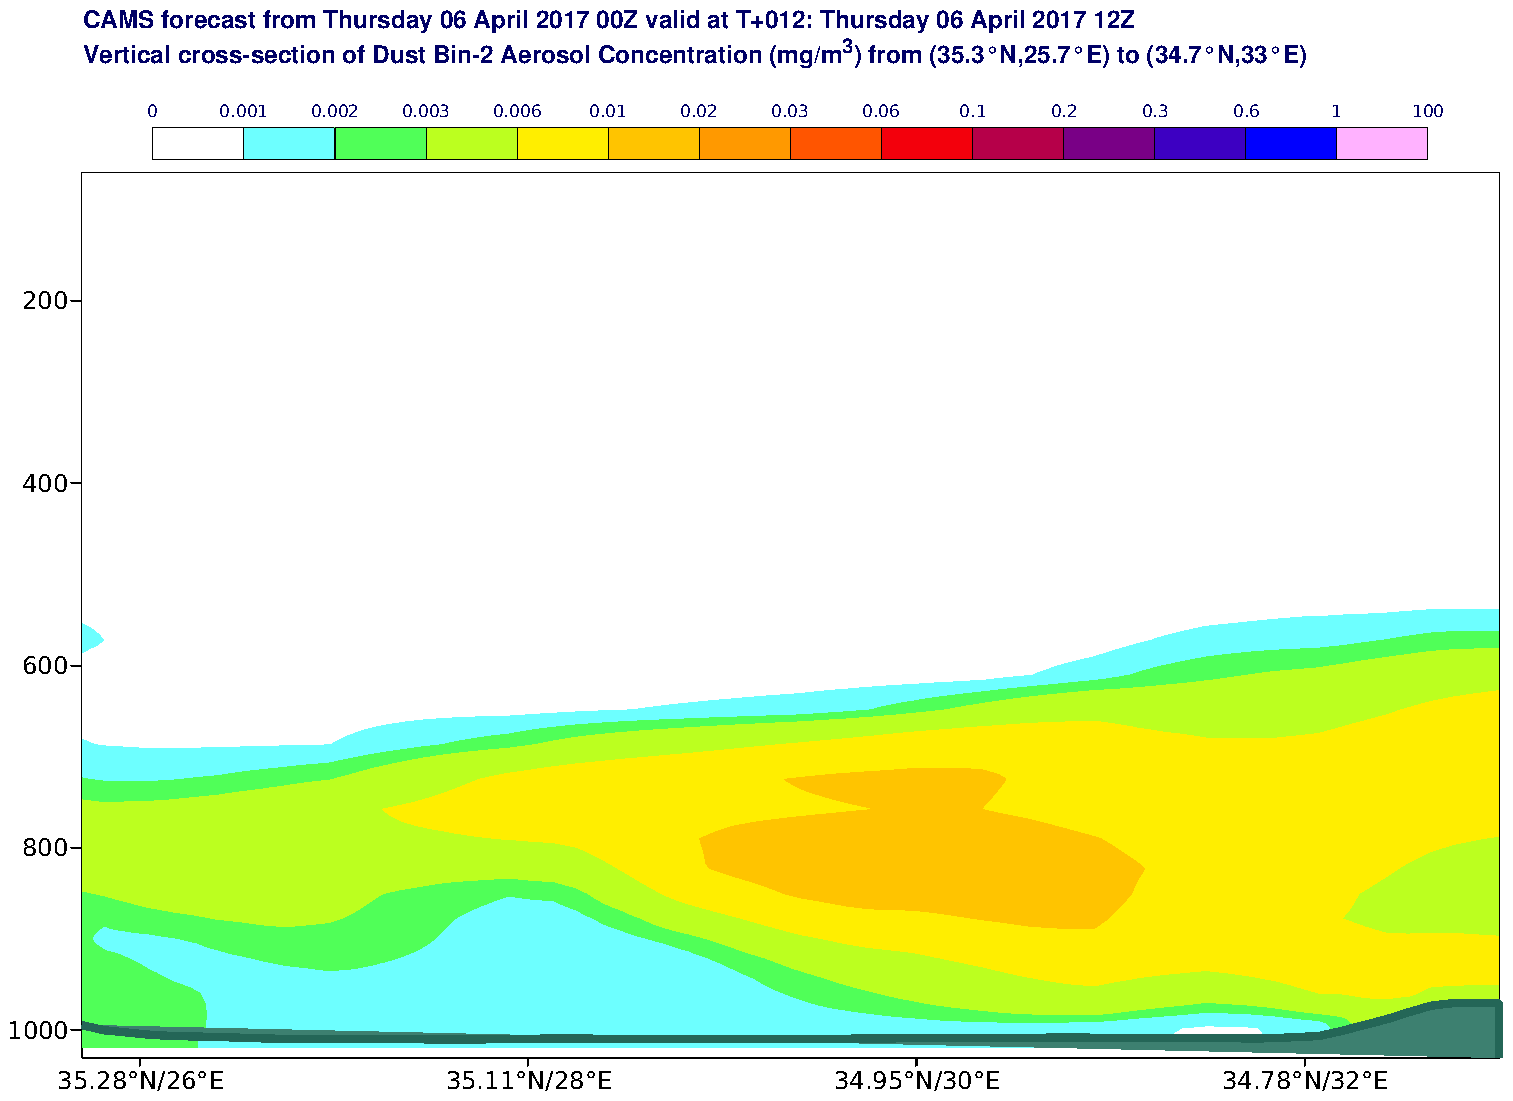 Vertical cross-section of Dust Bin-2 Aerosol Concentration (mg/m3) valid at T12 - 2017-04-06 12:00